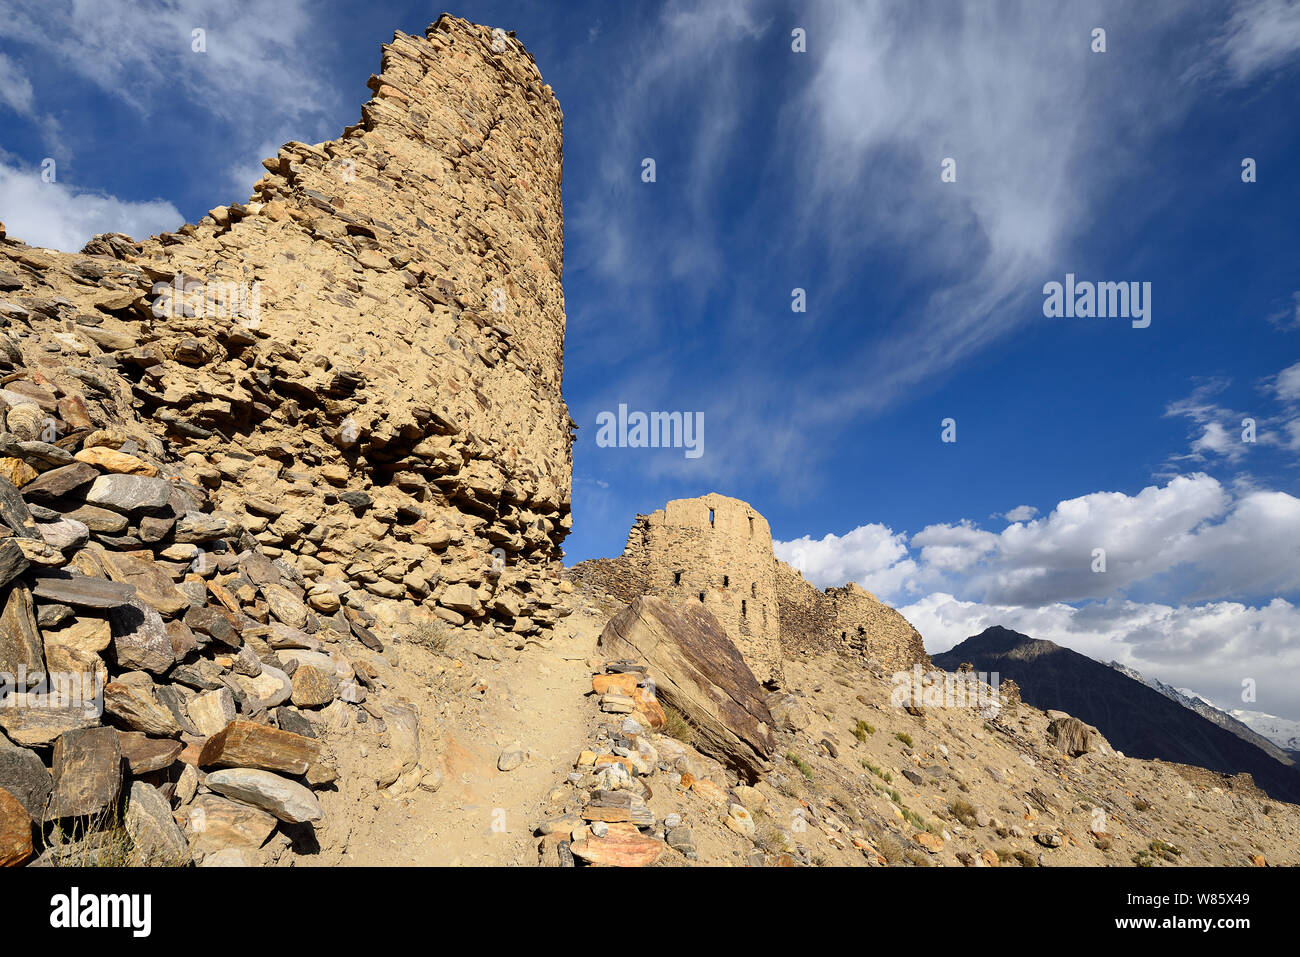 View on the Wakhan Valley in the Pamir mountain, The ruins of the Yamchun Fort and the white Hindu Kush range in Afghanistan, Tajikistan, Central Asia Stock Photo